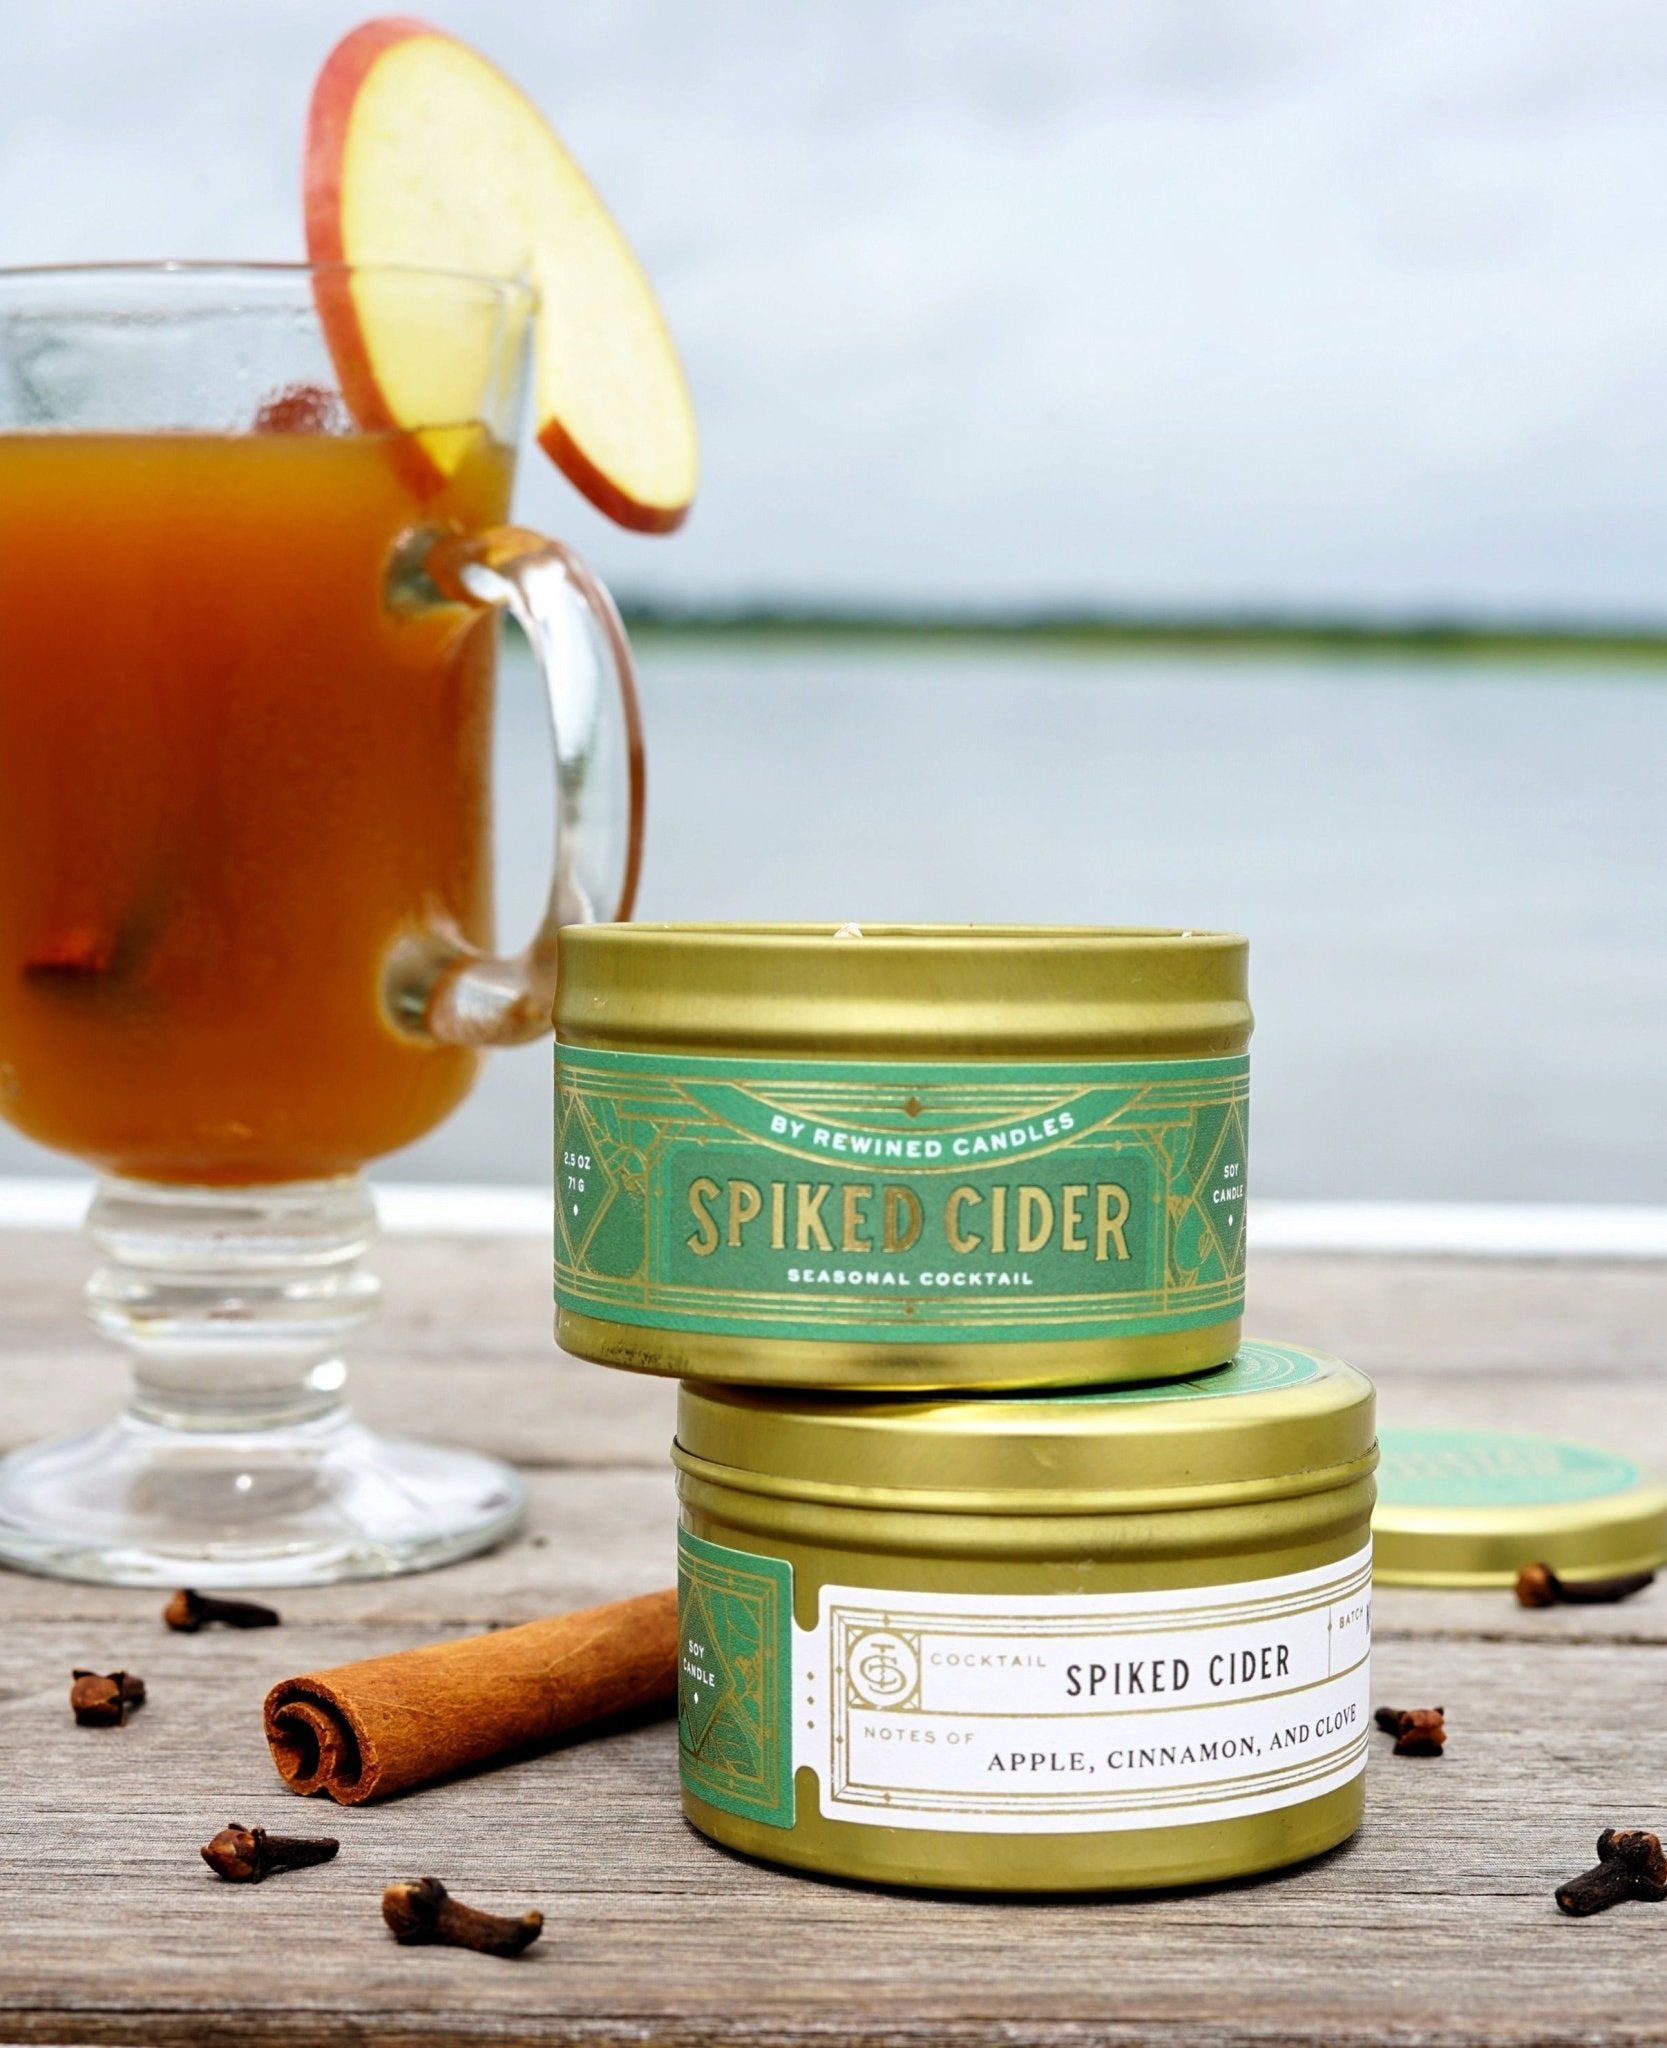 Rewined Candle Co. Spiked Cider Travel Tin - Essentially Charleston